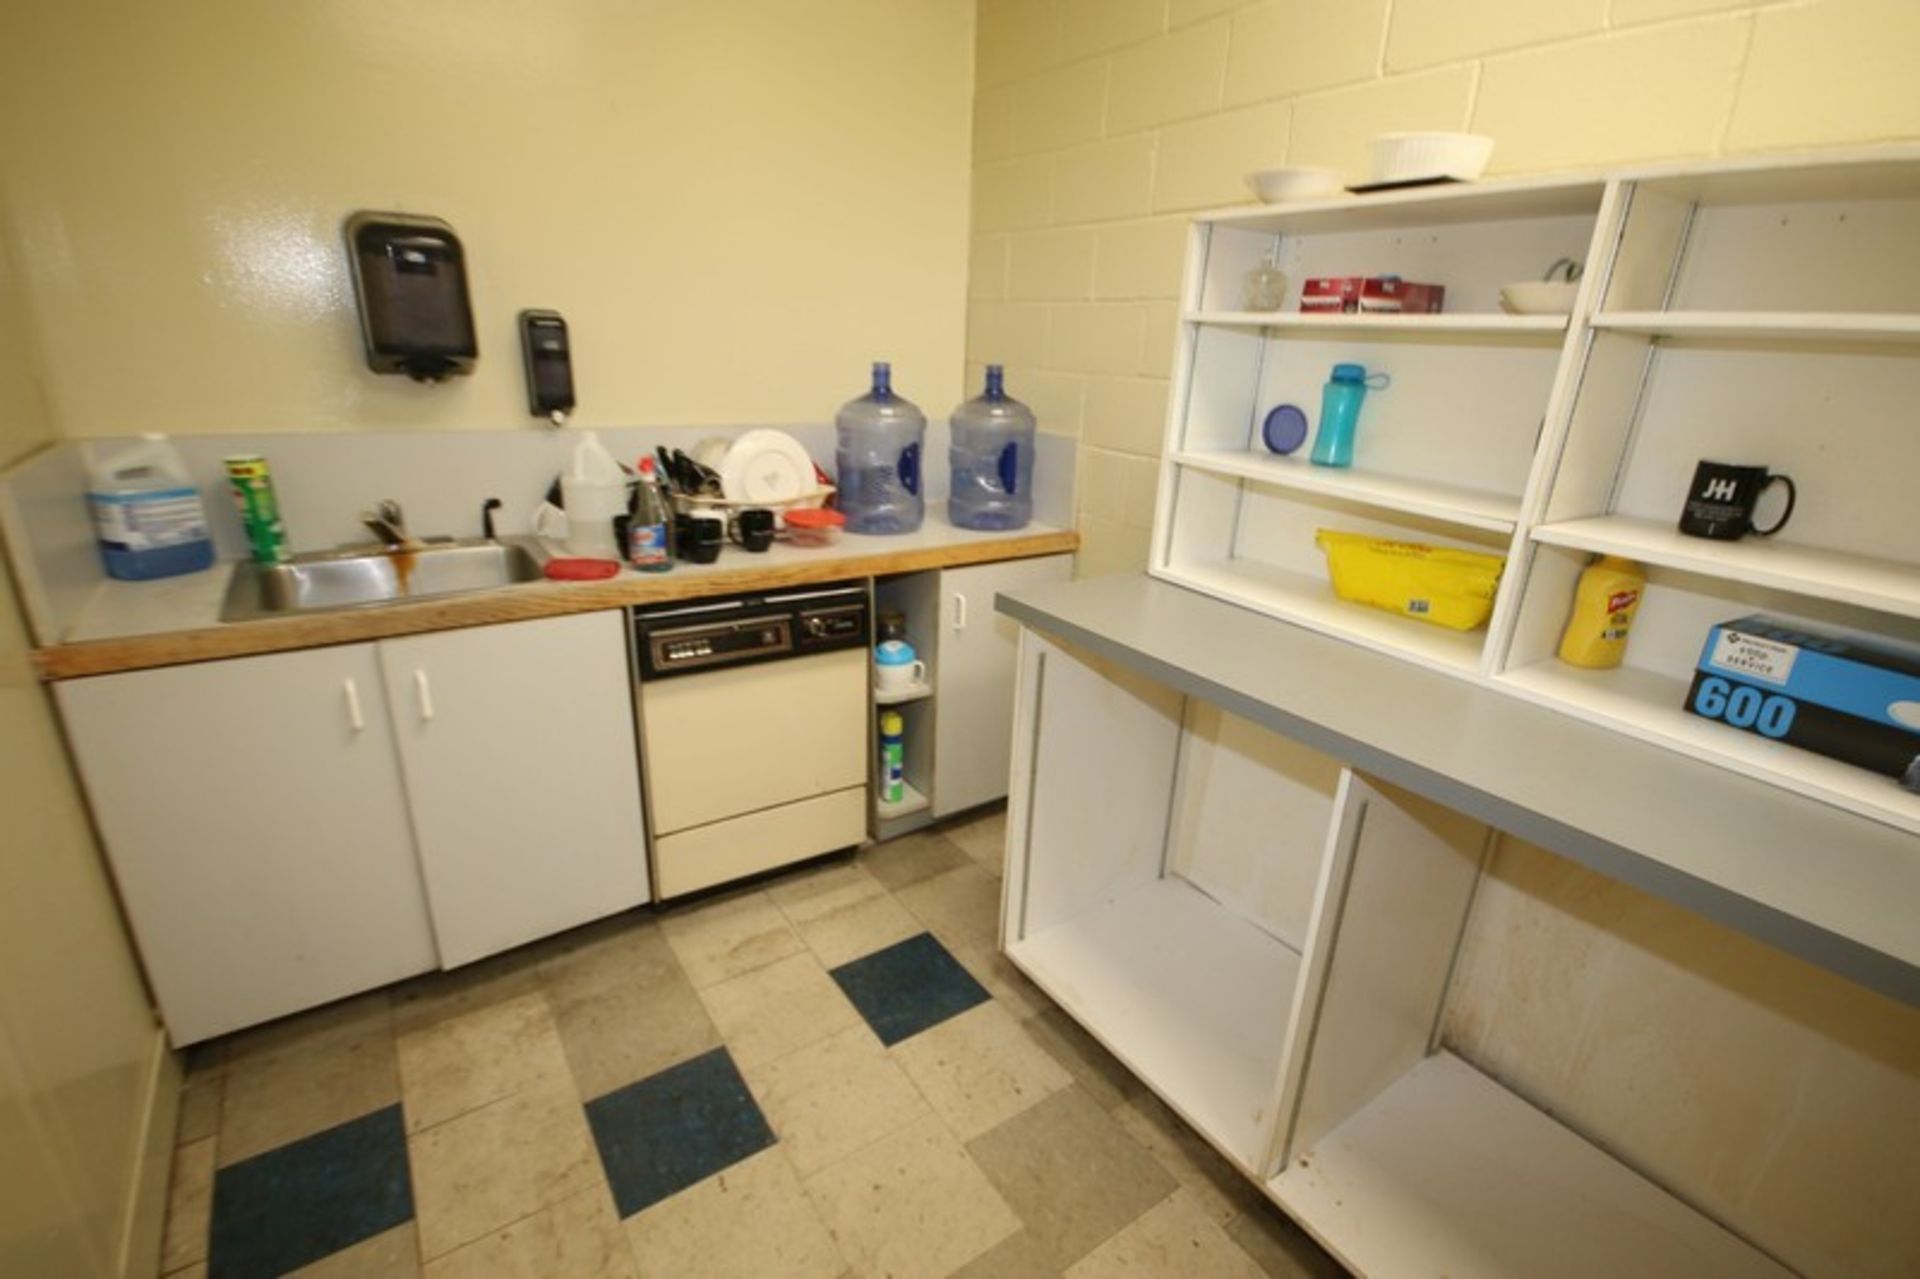 Contents of Break Room, Includes (2) Soda Dispensing Machines, 2-Shelf S/S Warming Station, - Image 7 of 7